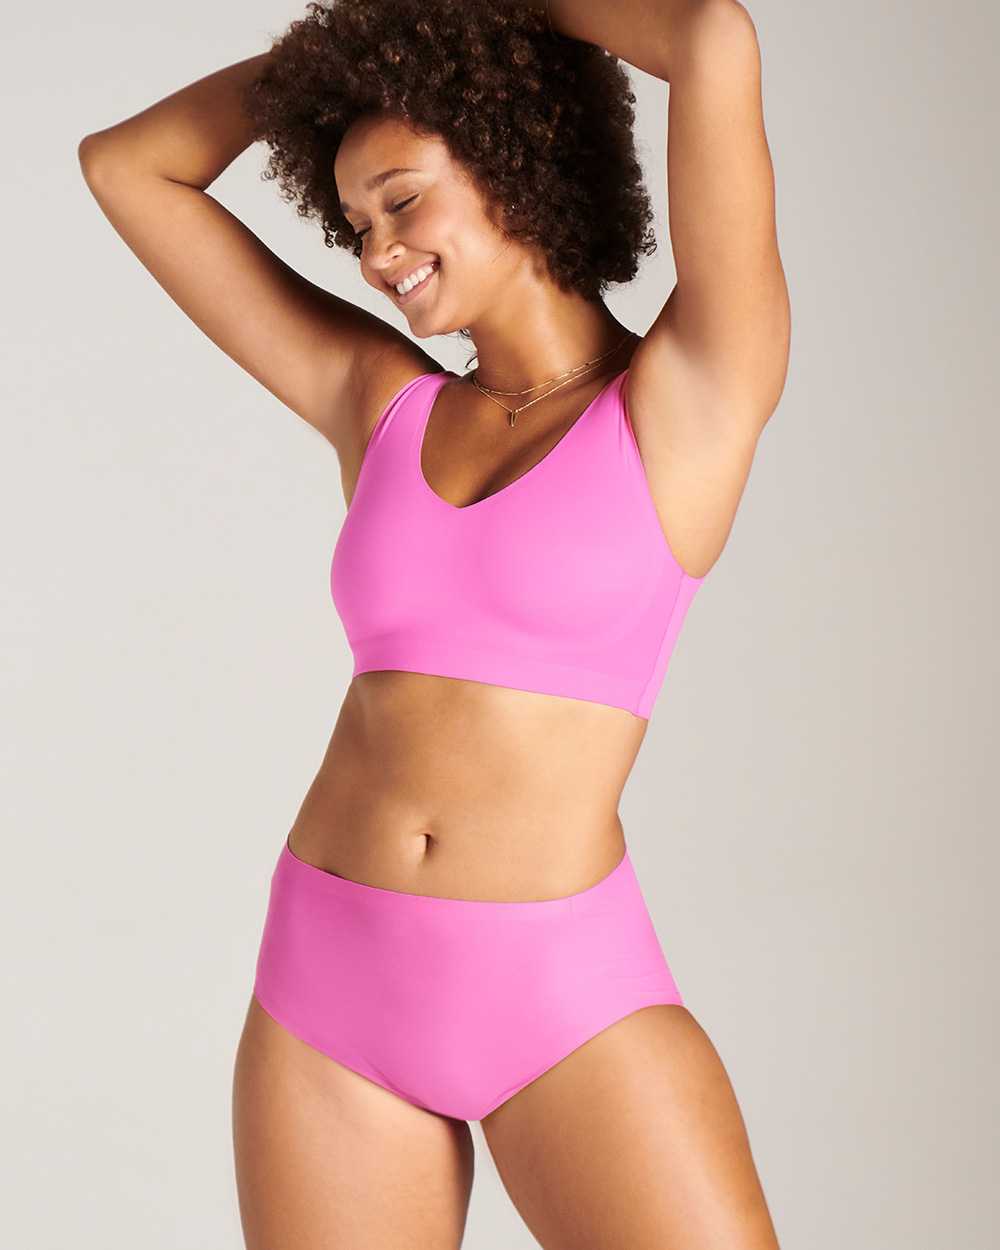 Soma<sup class=st-superscript>®</sup> model wearing a pink bralette and matching brief panties.